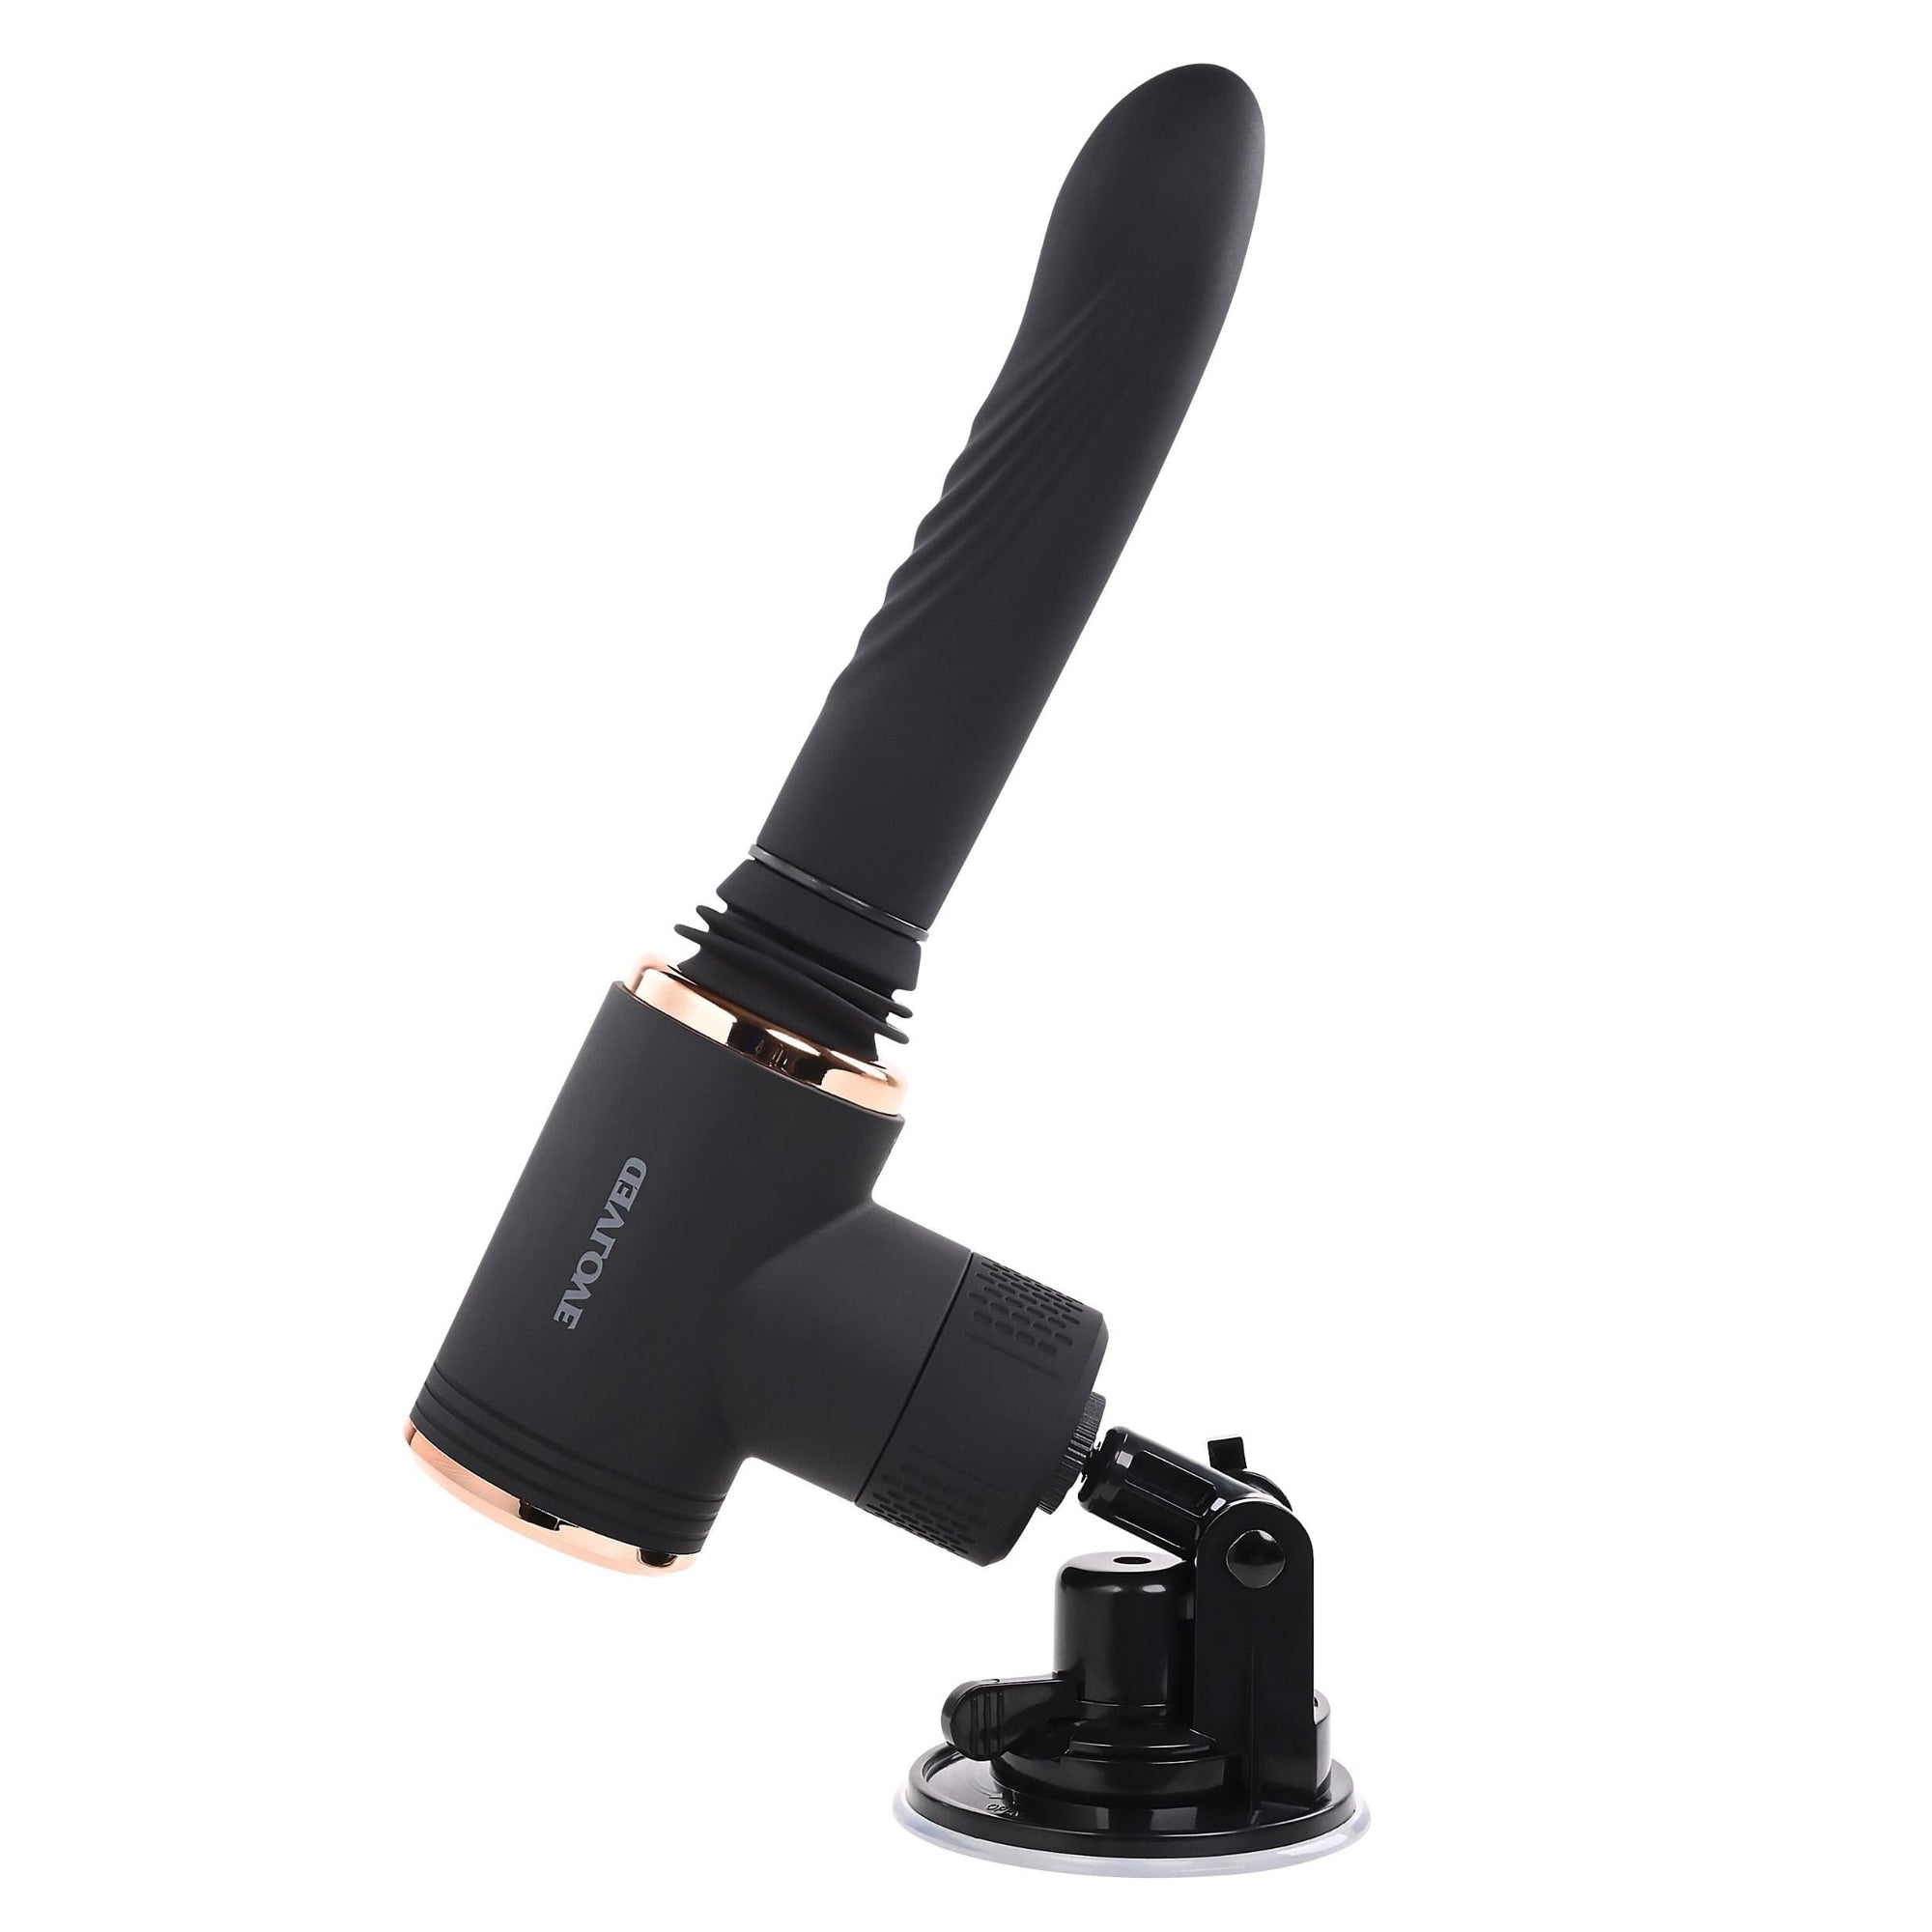 suction vibrator, suction cup vibrator